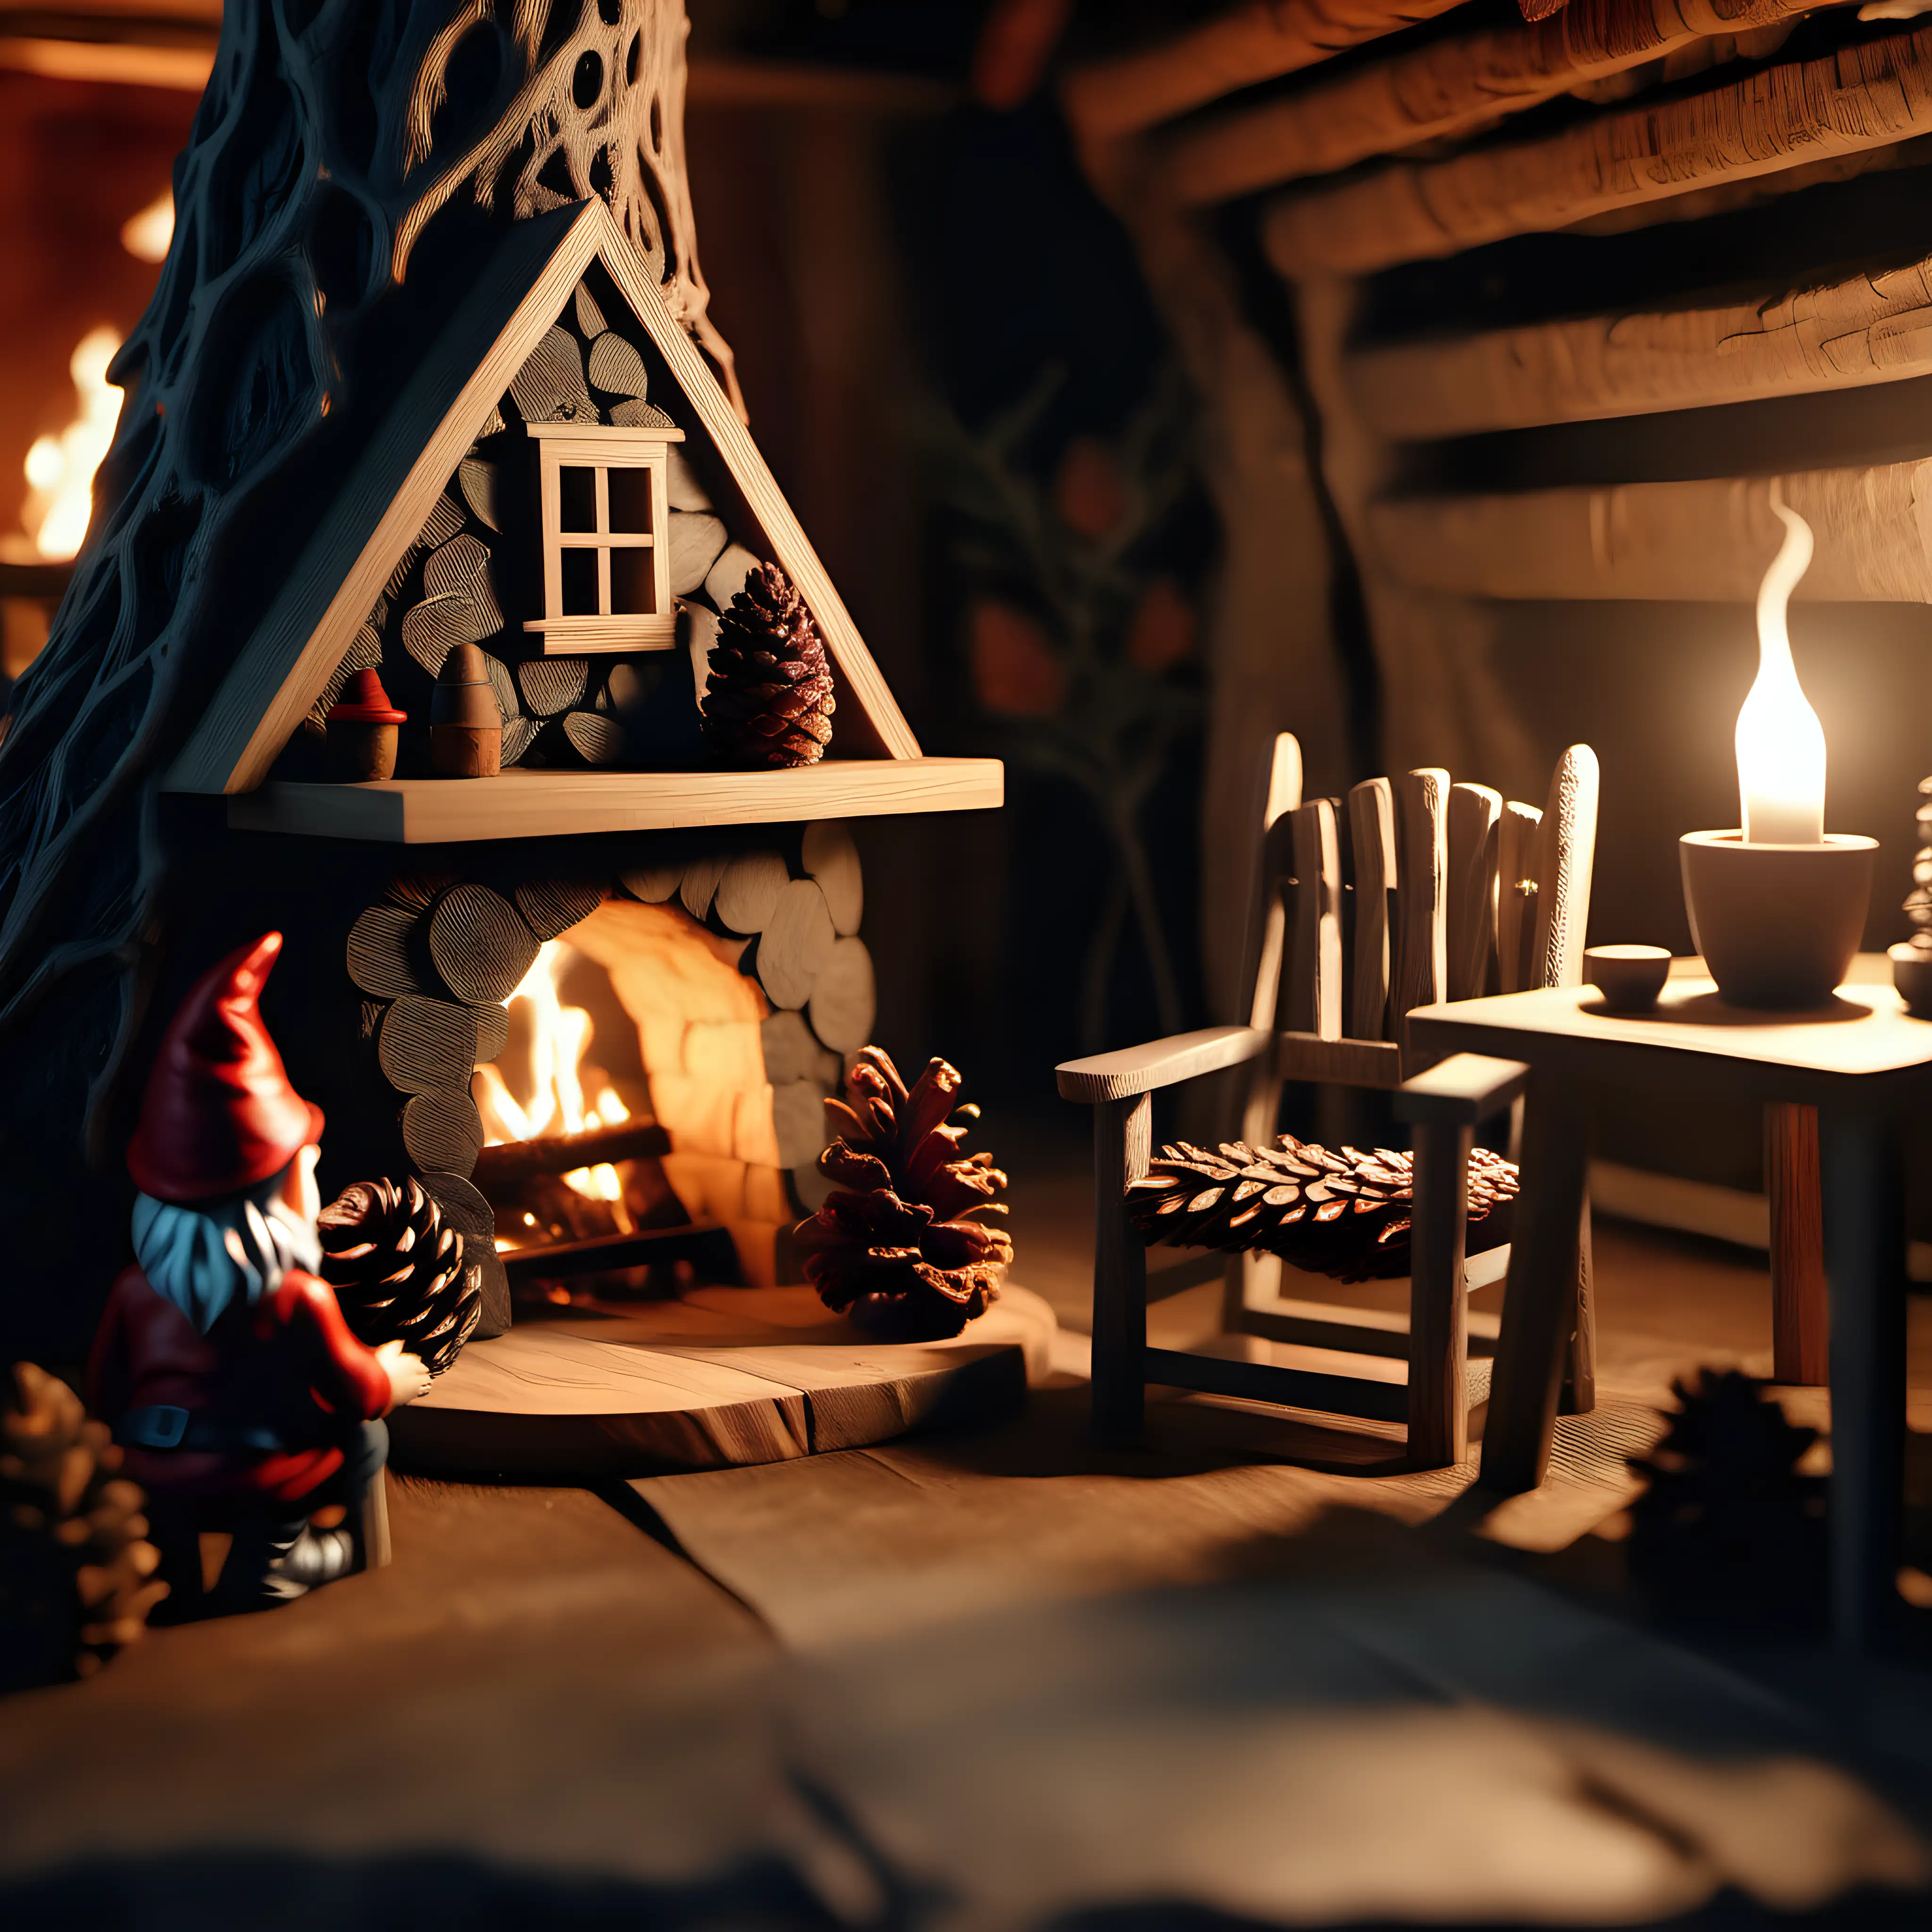 Cozy Gnome Home Miniature Furniture and Fireplace in 4K Volumetric Light